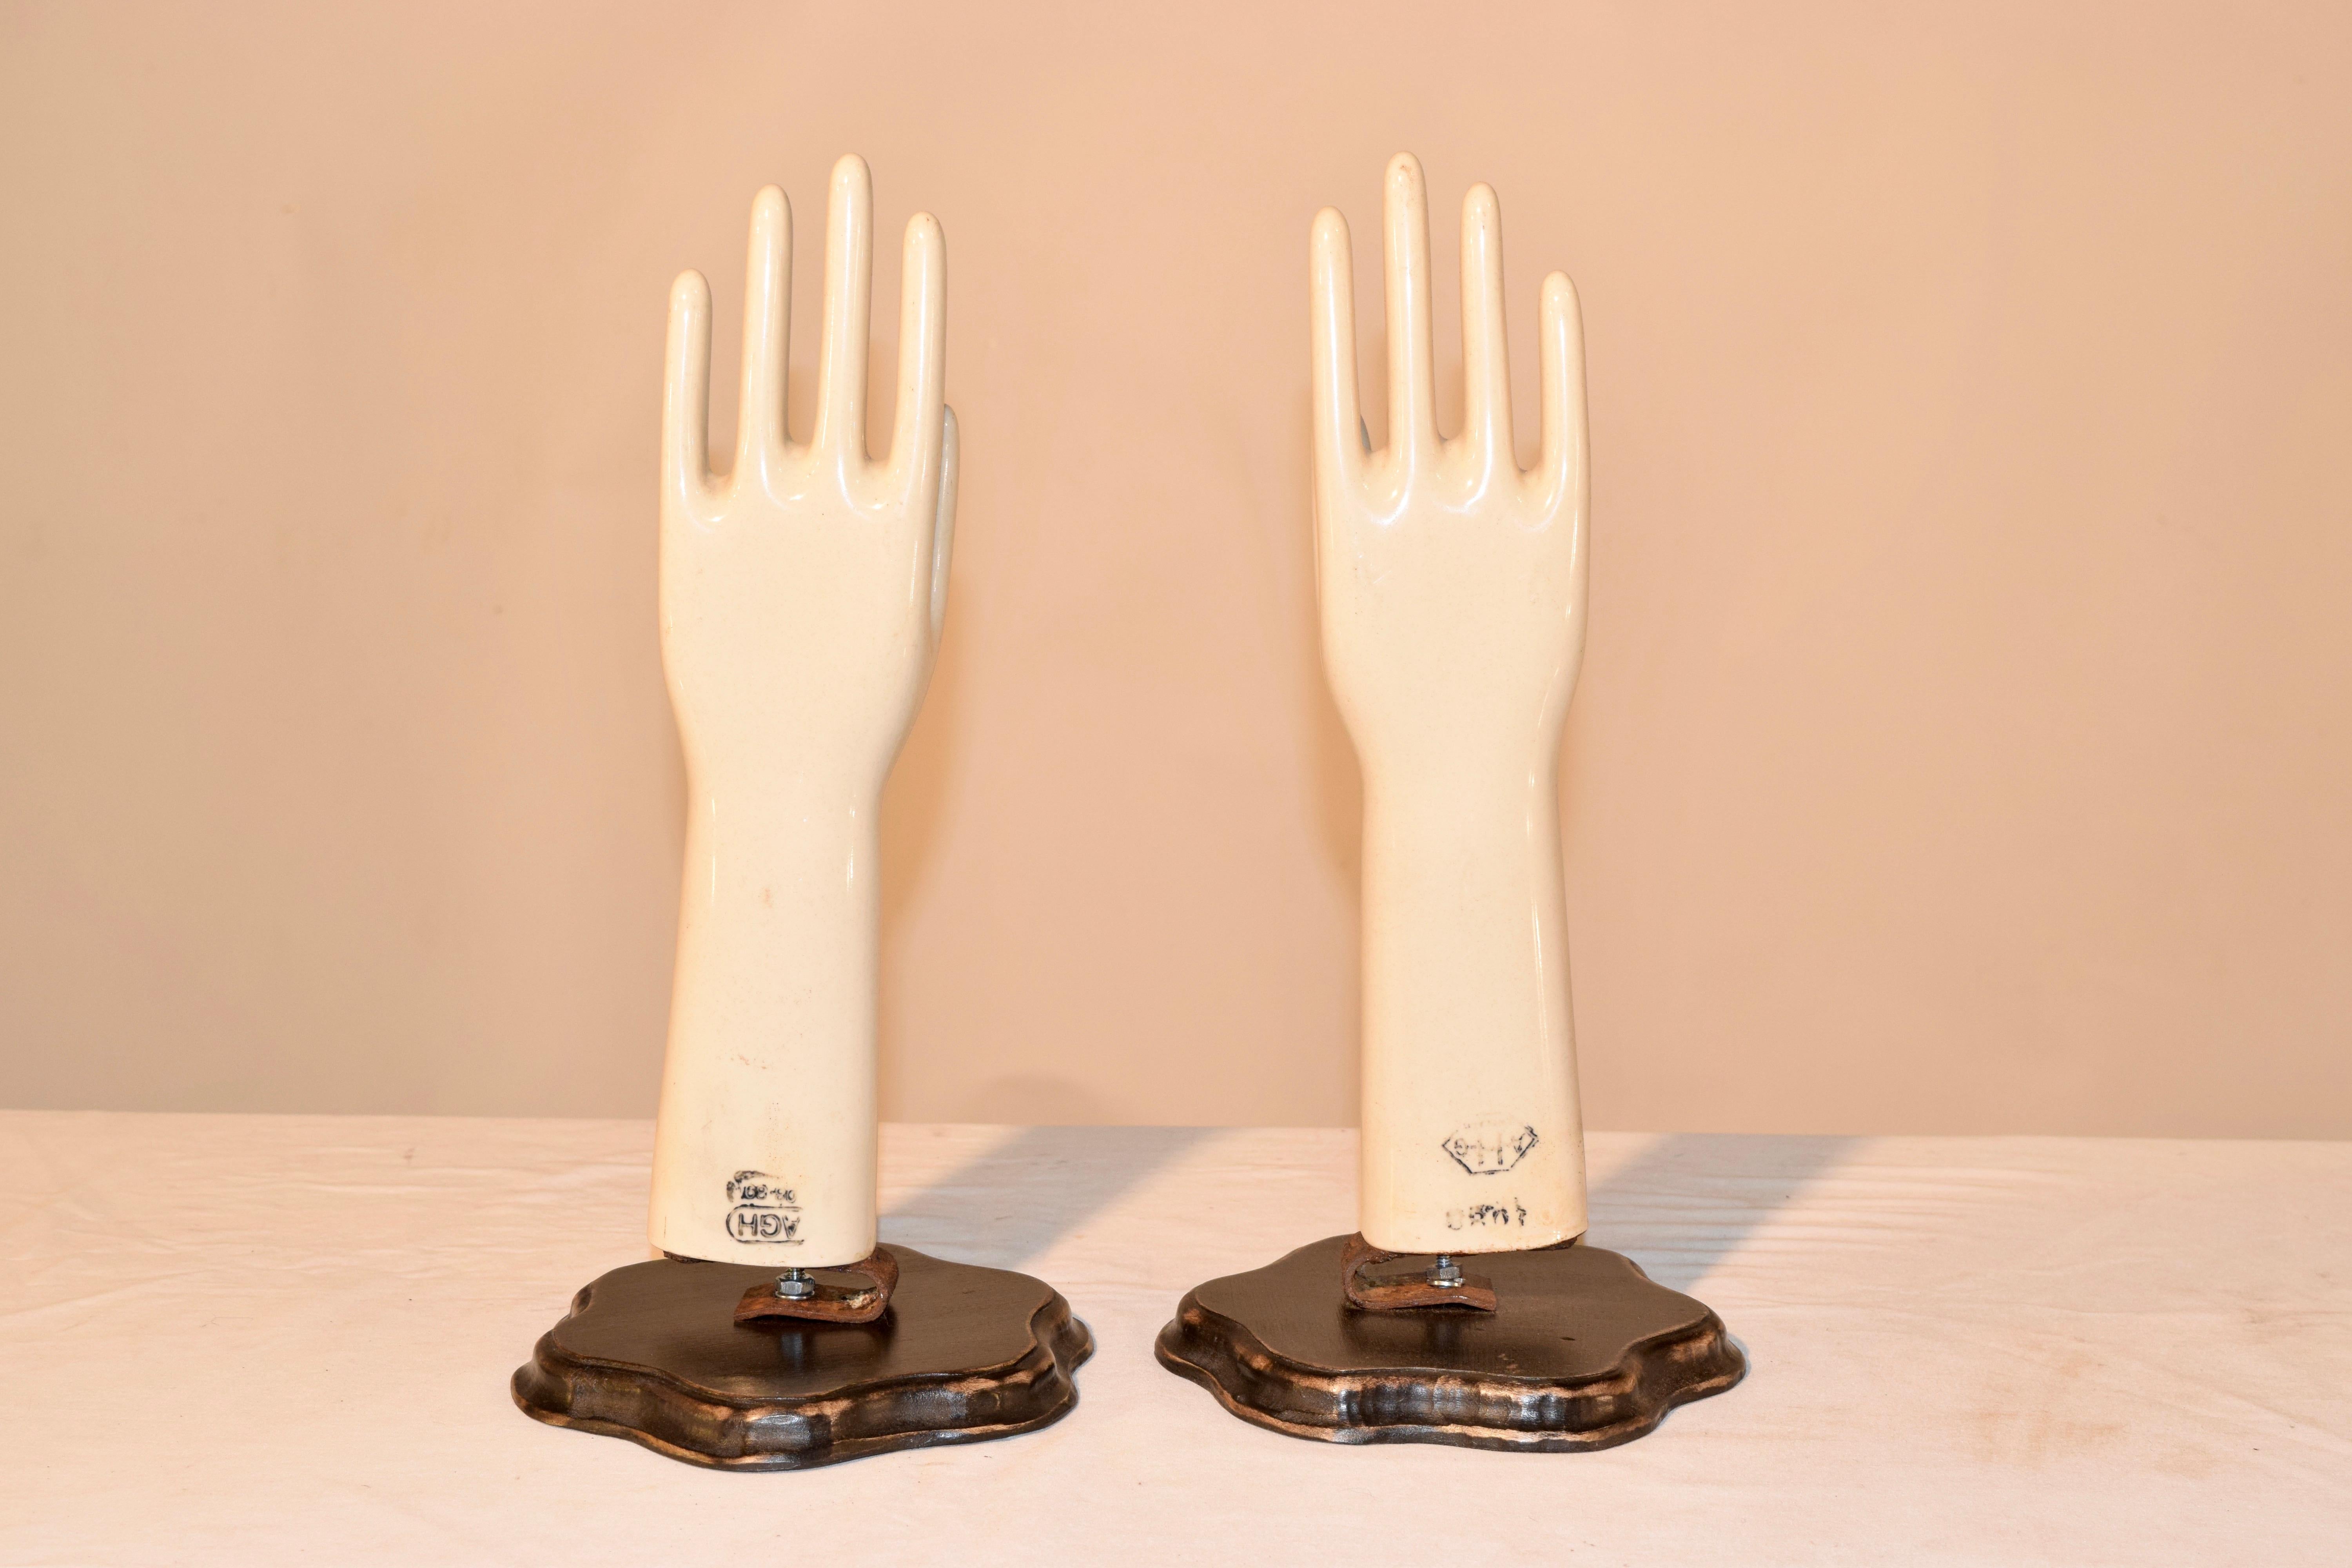 Pair of English porcelain molds for the making of latex gloves. Made from the best ceramics, they were immersed in vats of bubbling liquid latex. They were made by the best porcelain manufacturers worldwide; among which are Rosenthal, Villeroy &